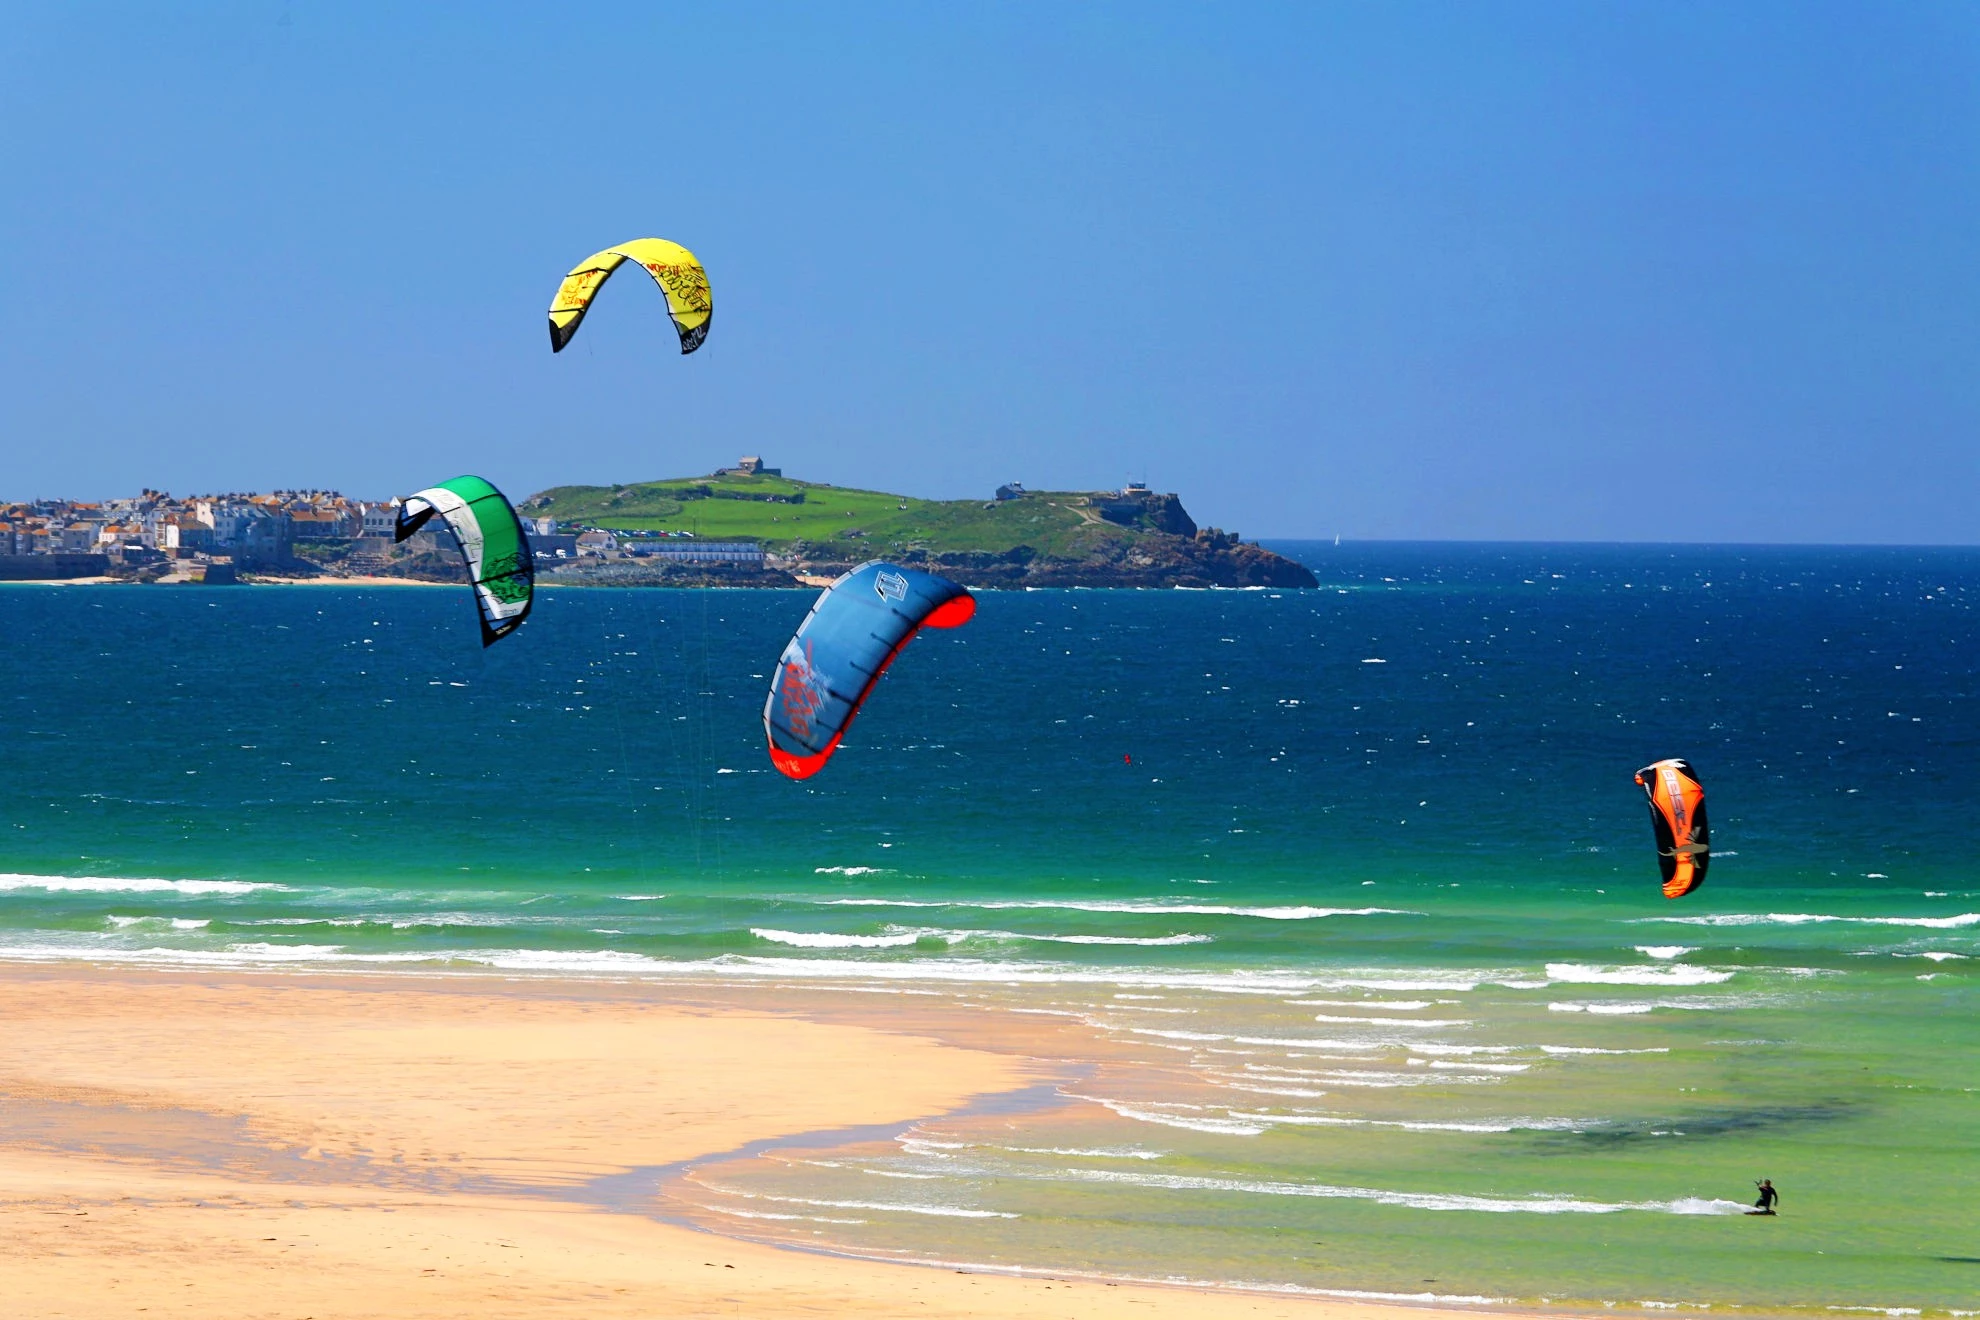 Hayle river mouth, famous as one of the best kitesurfing locations in Europe